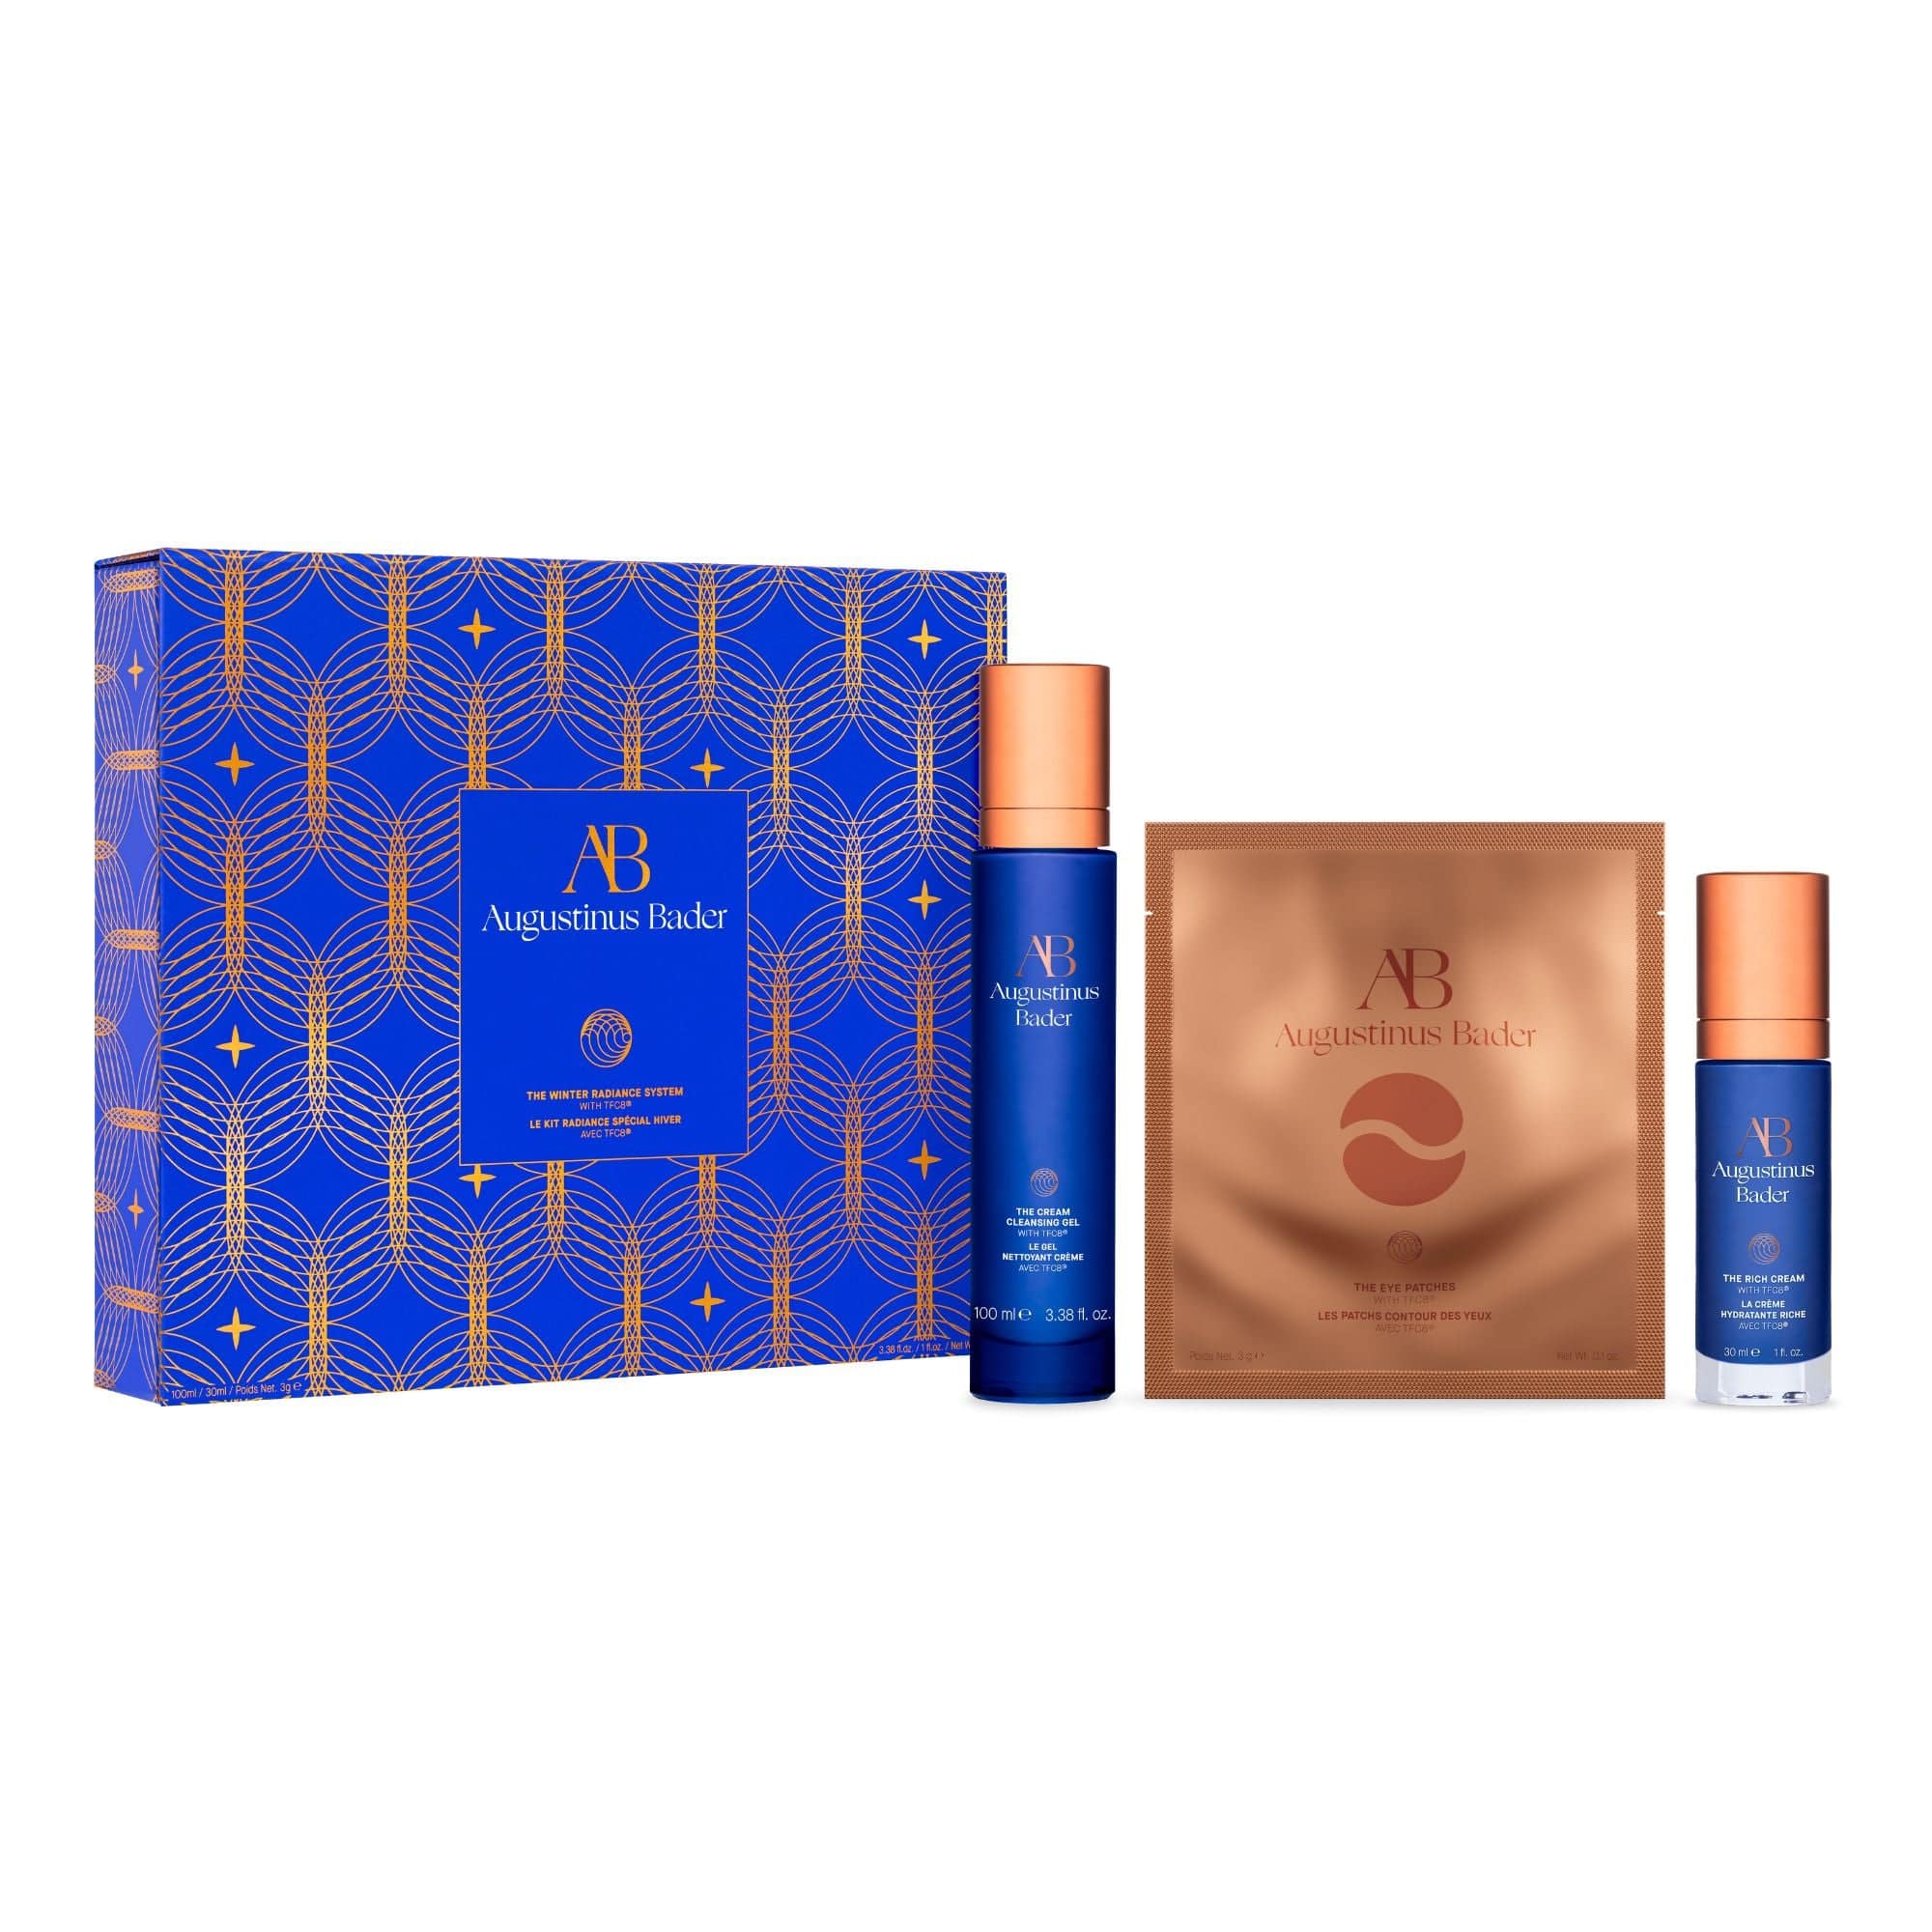 The Winter Radiance System Augustinus Bader Facial Set